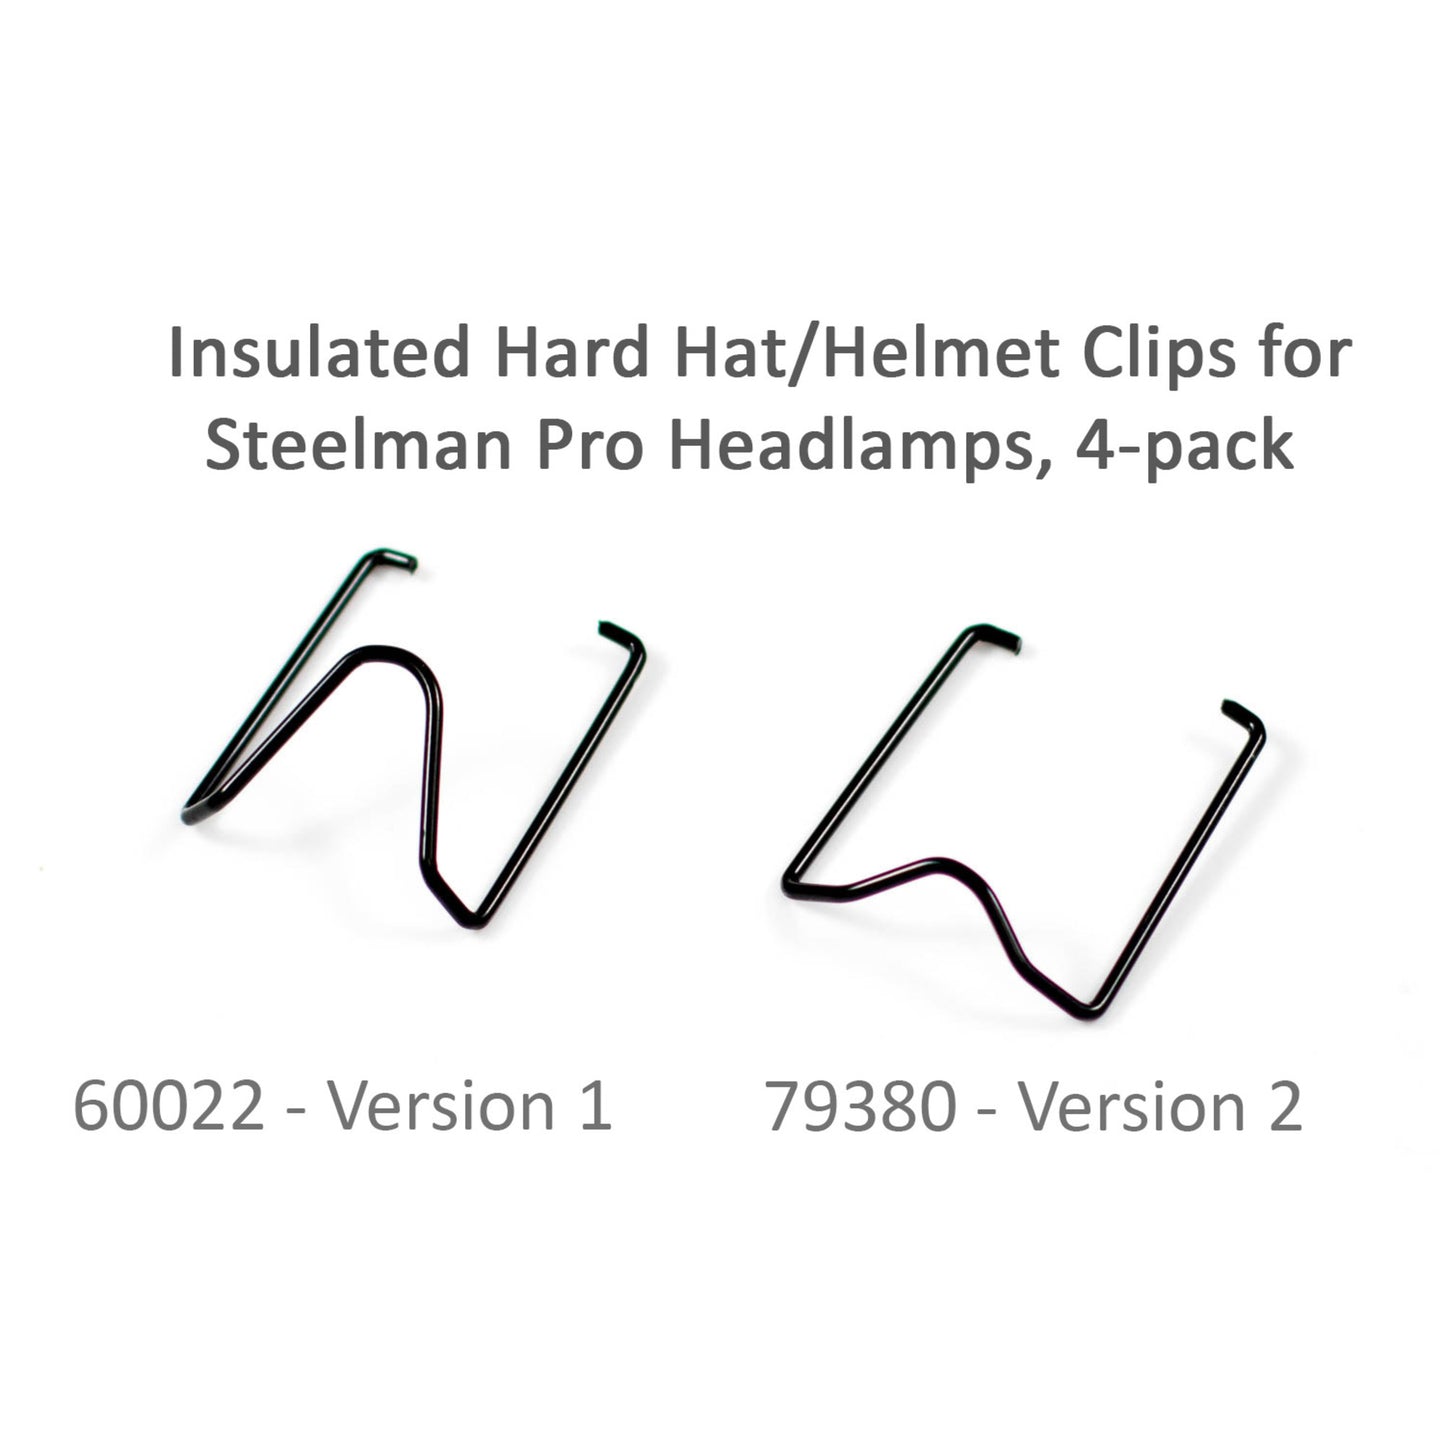 Insulated Hard Hat/Helmet Attachment Clips for Headlamps, 4-pack